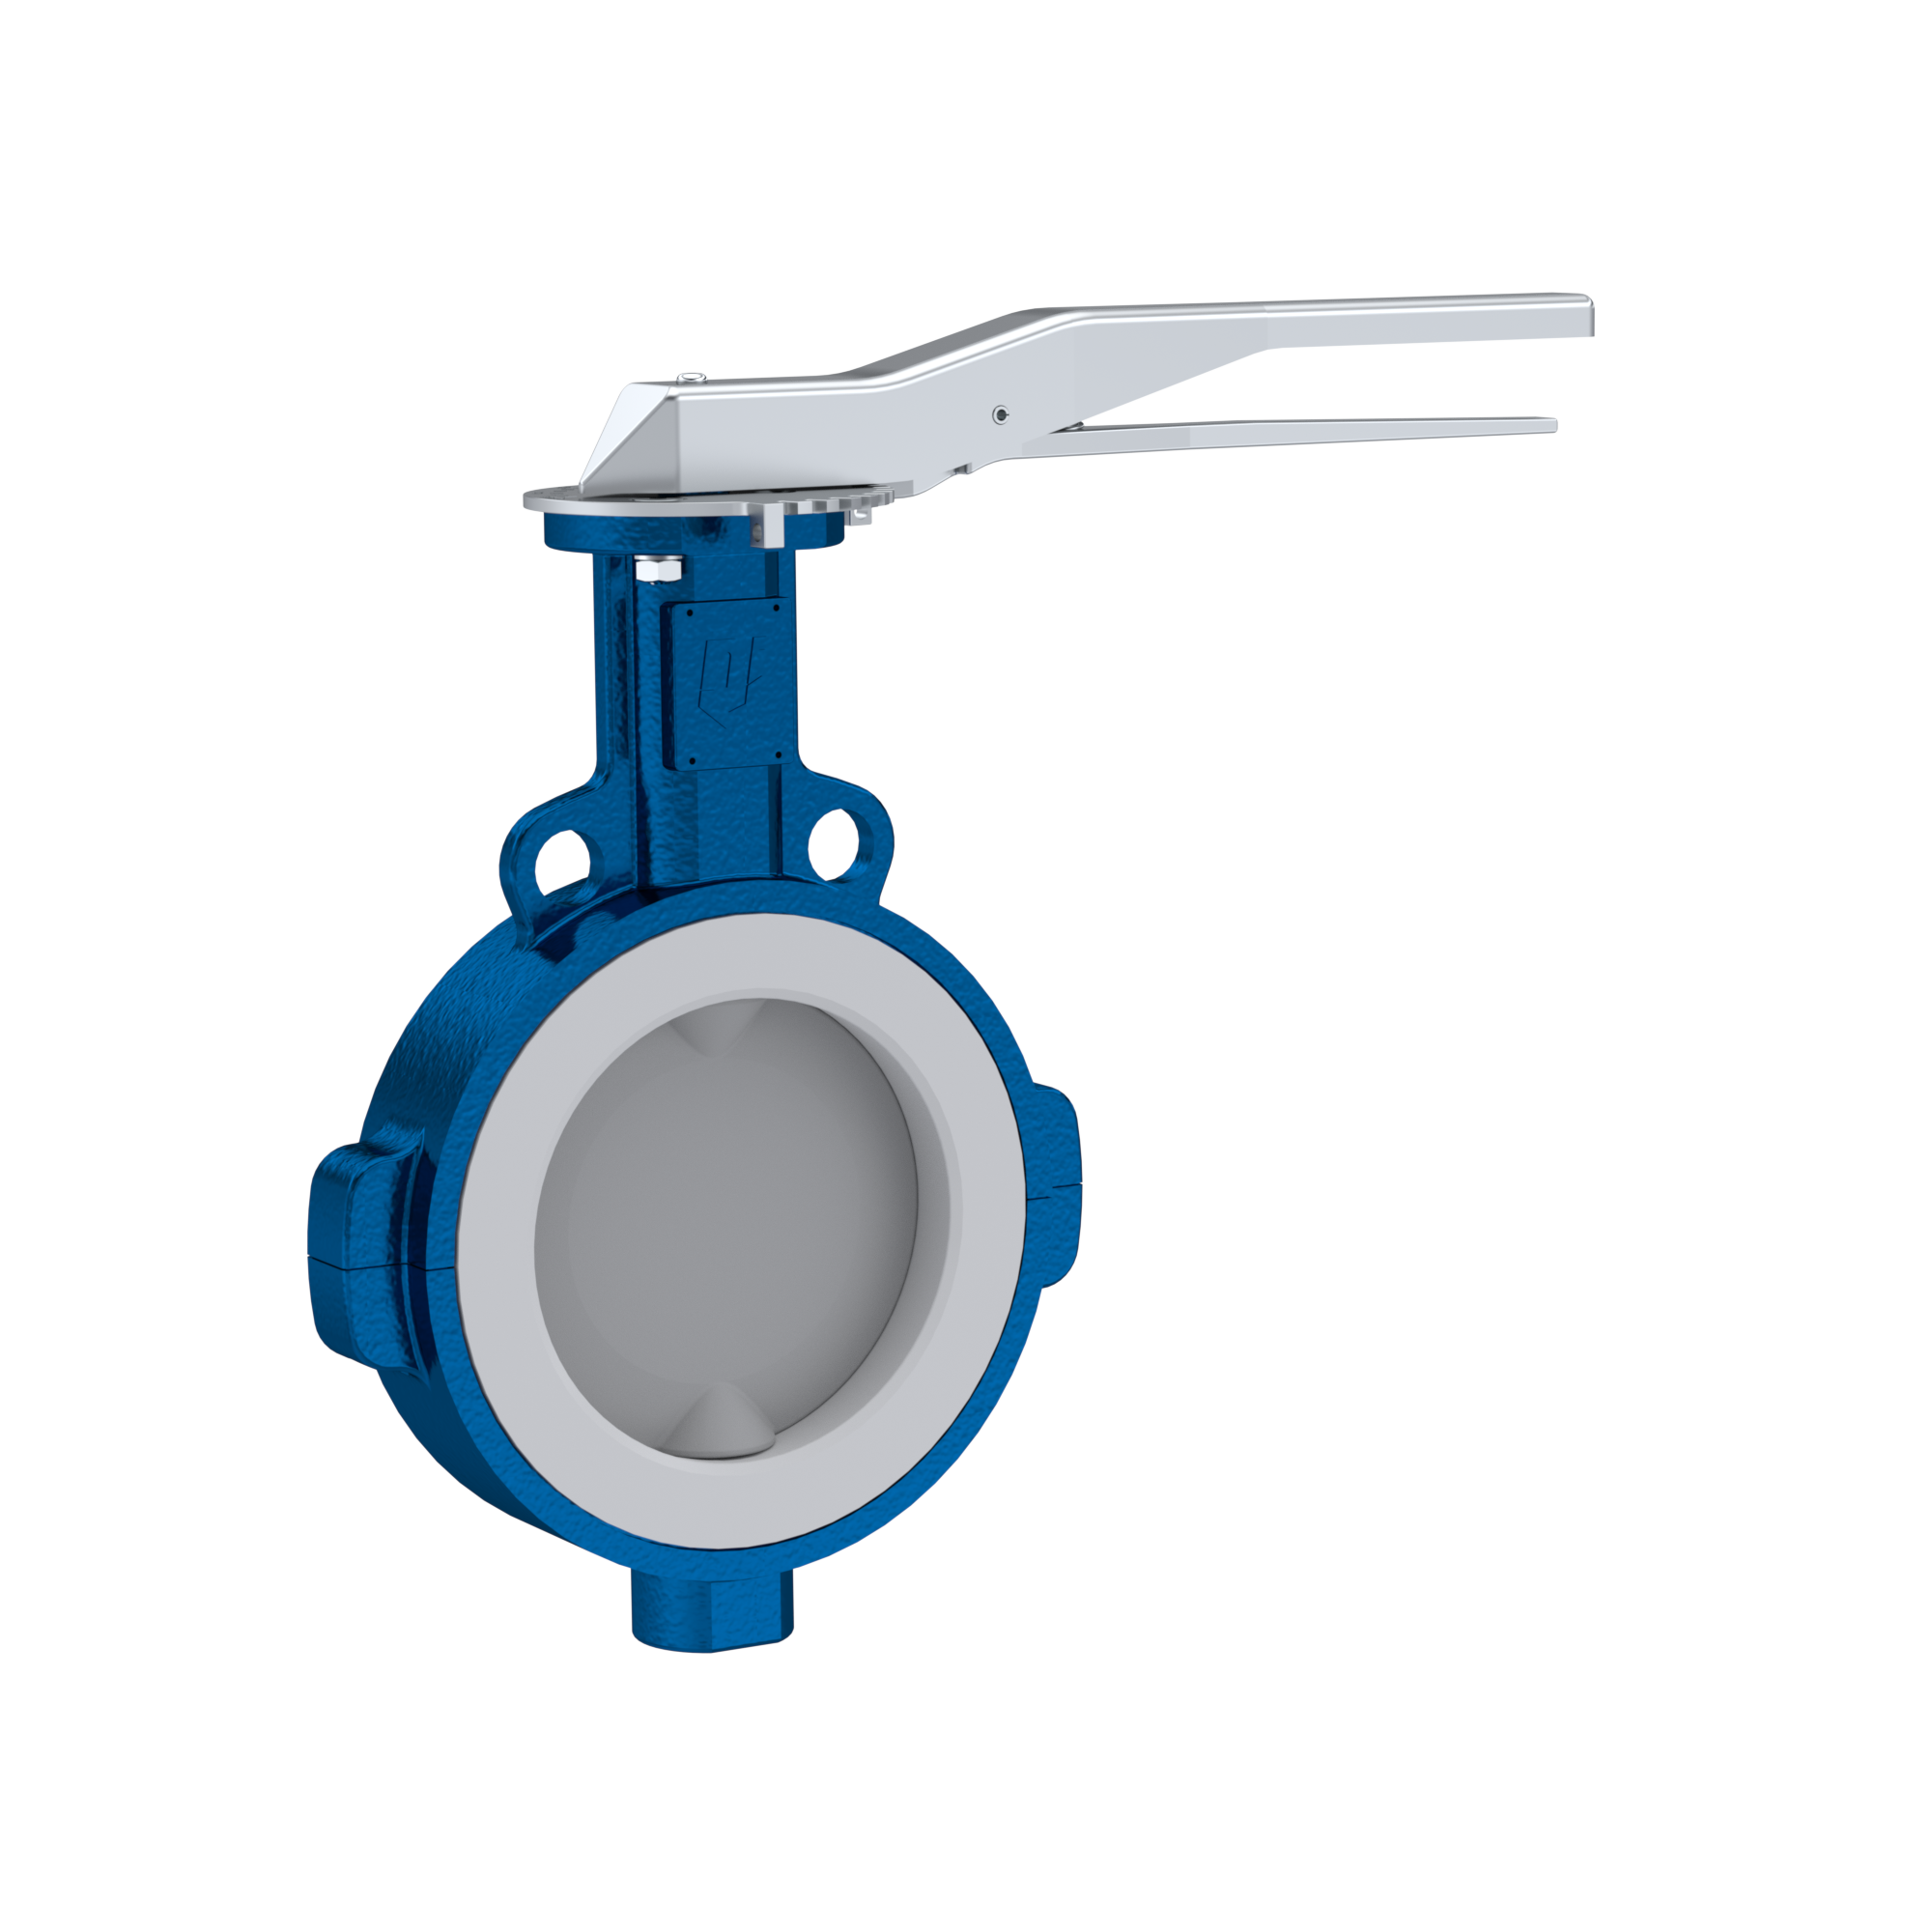 PFA-Butterfly-valve PTFE AK09 DN200 PN10-PN16 lever silicone insert